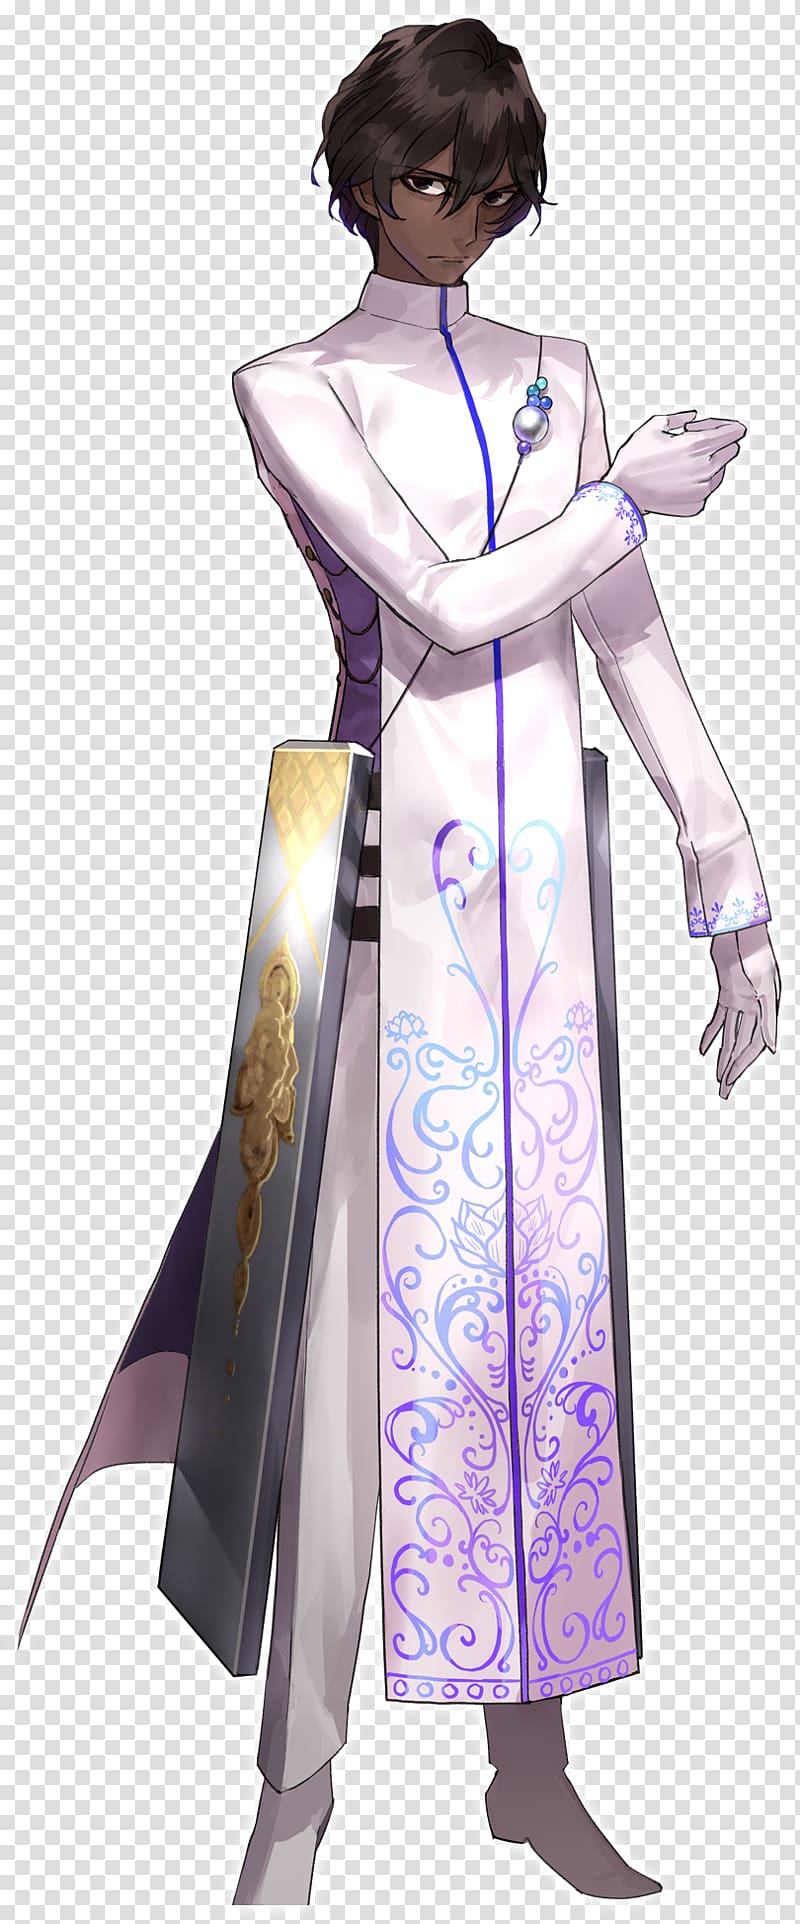 Fate/Extella Link Fate/stay night Fate/Extella: The Umbral Star Fate/Extra Fate/Grand Order, Arjuna transparent background PNG clipart